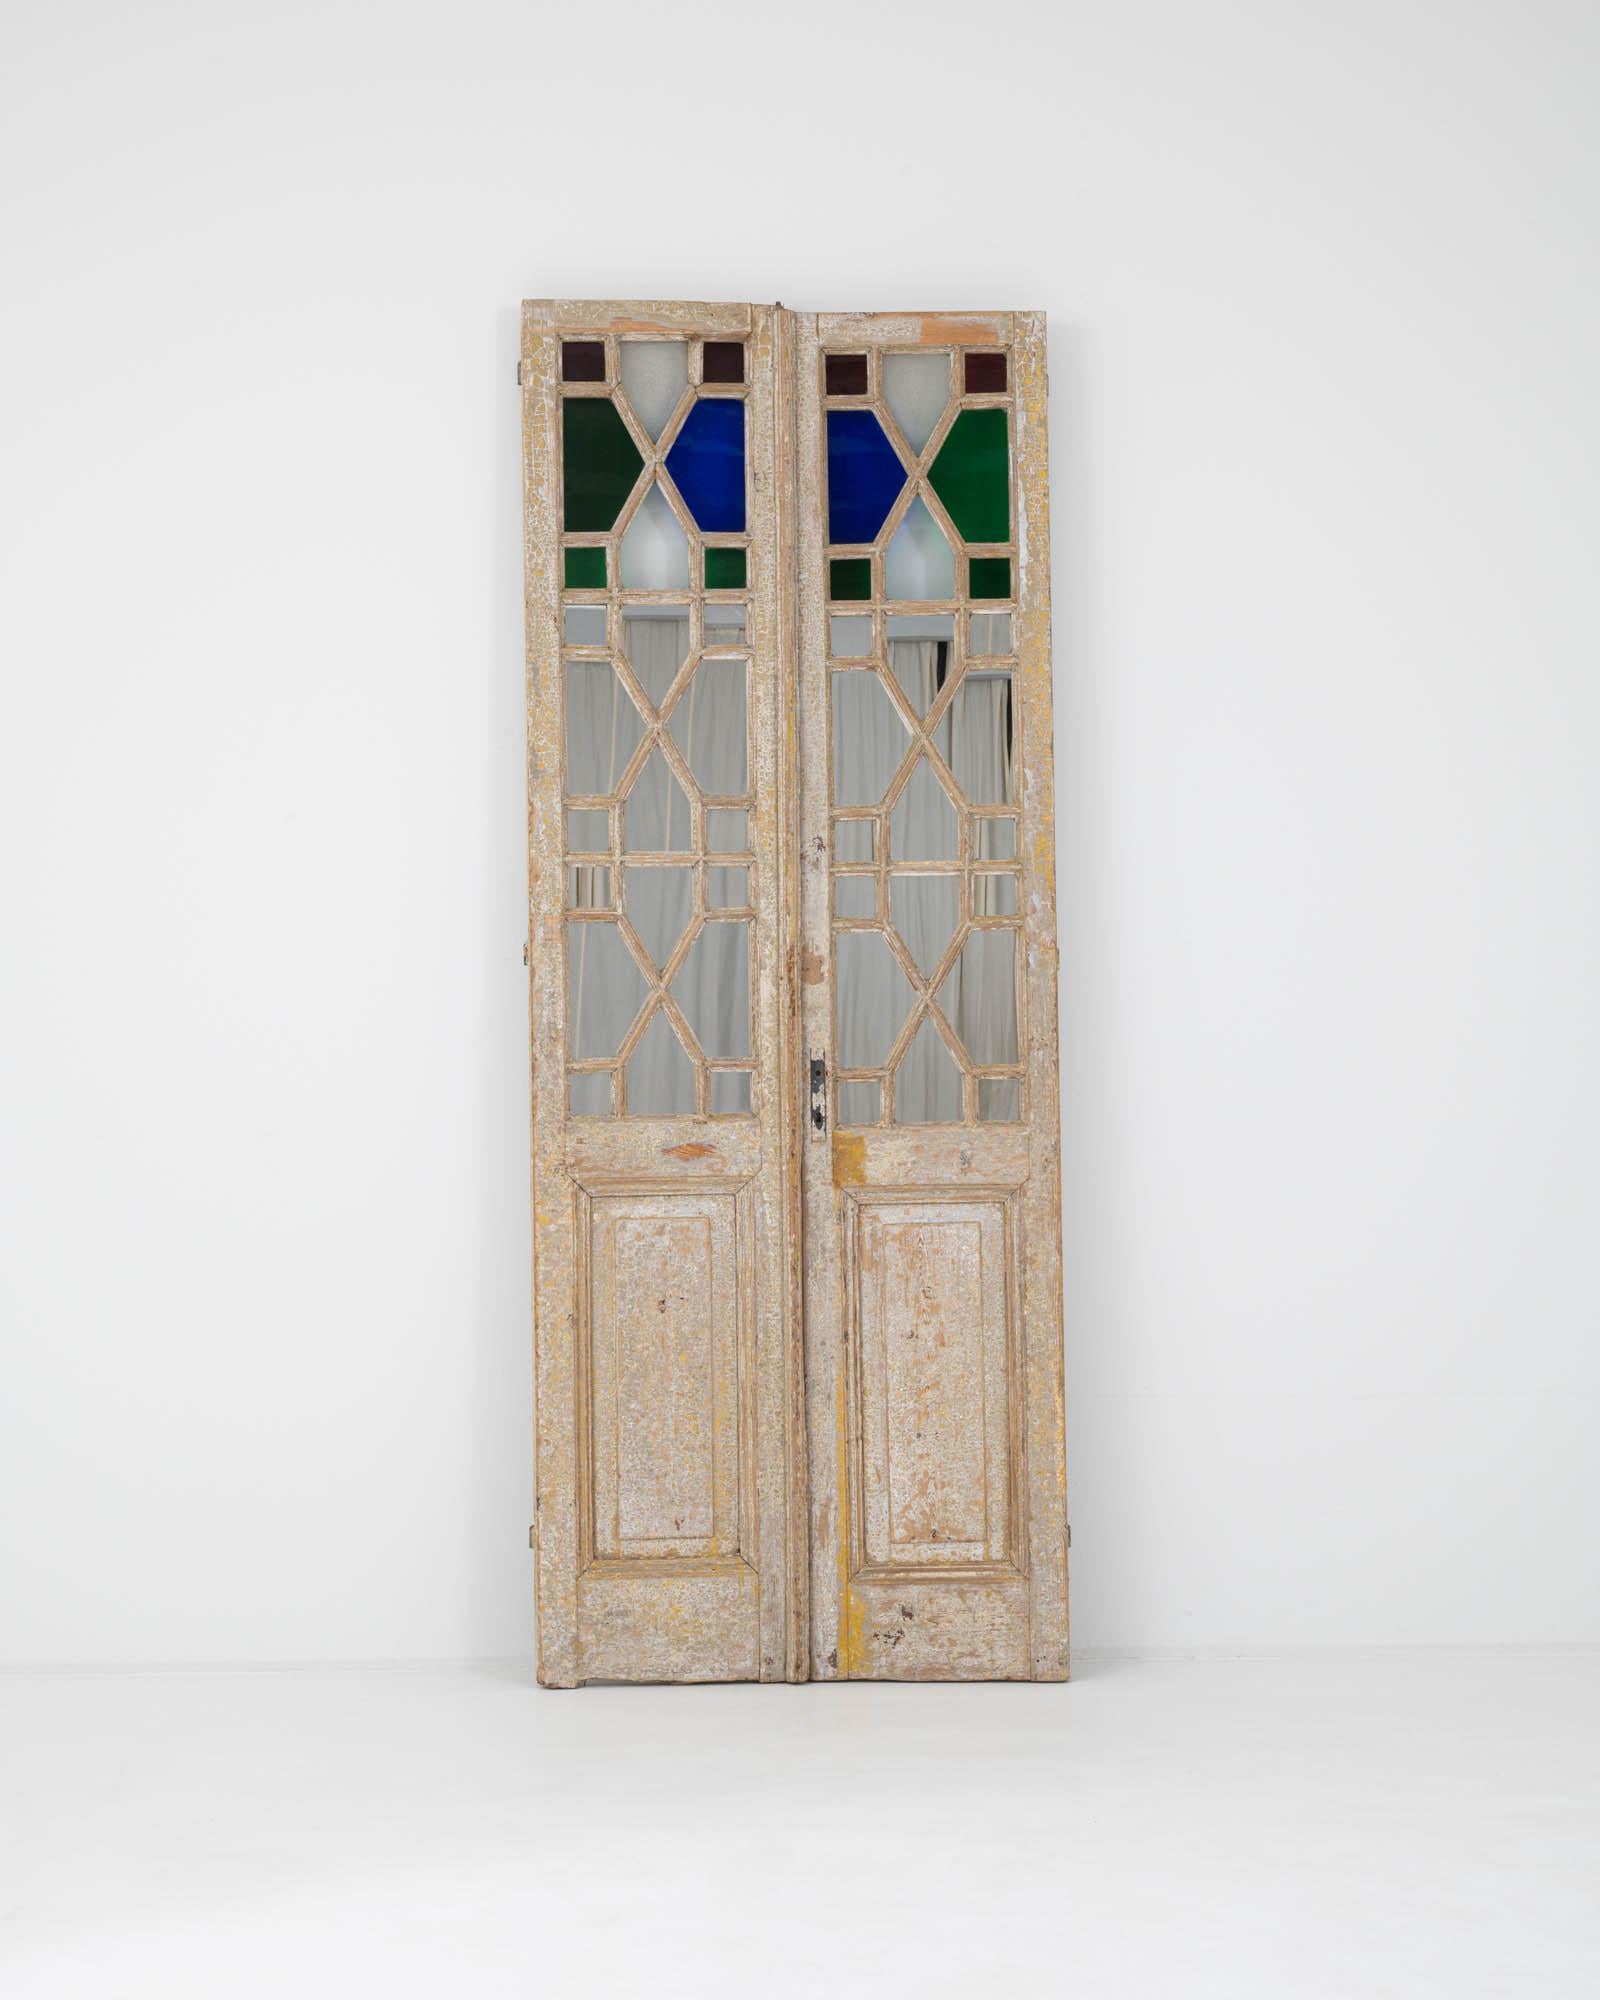 Tall, slender and beautifully decorative, this pair of vintage wooden doors conjures the everyday elegance of a bygone age. Made in France at the turn of the century, the once-painted surface of the wooden frame has weathered to a nostalgic finish.